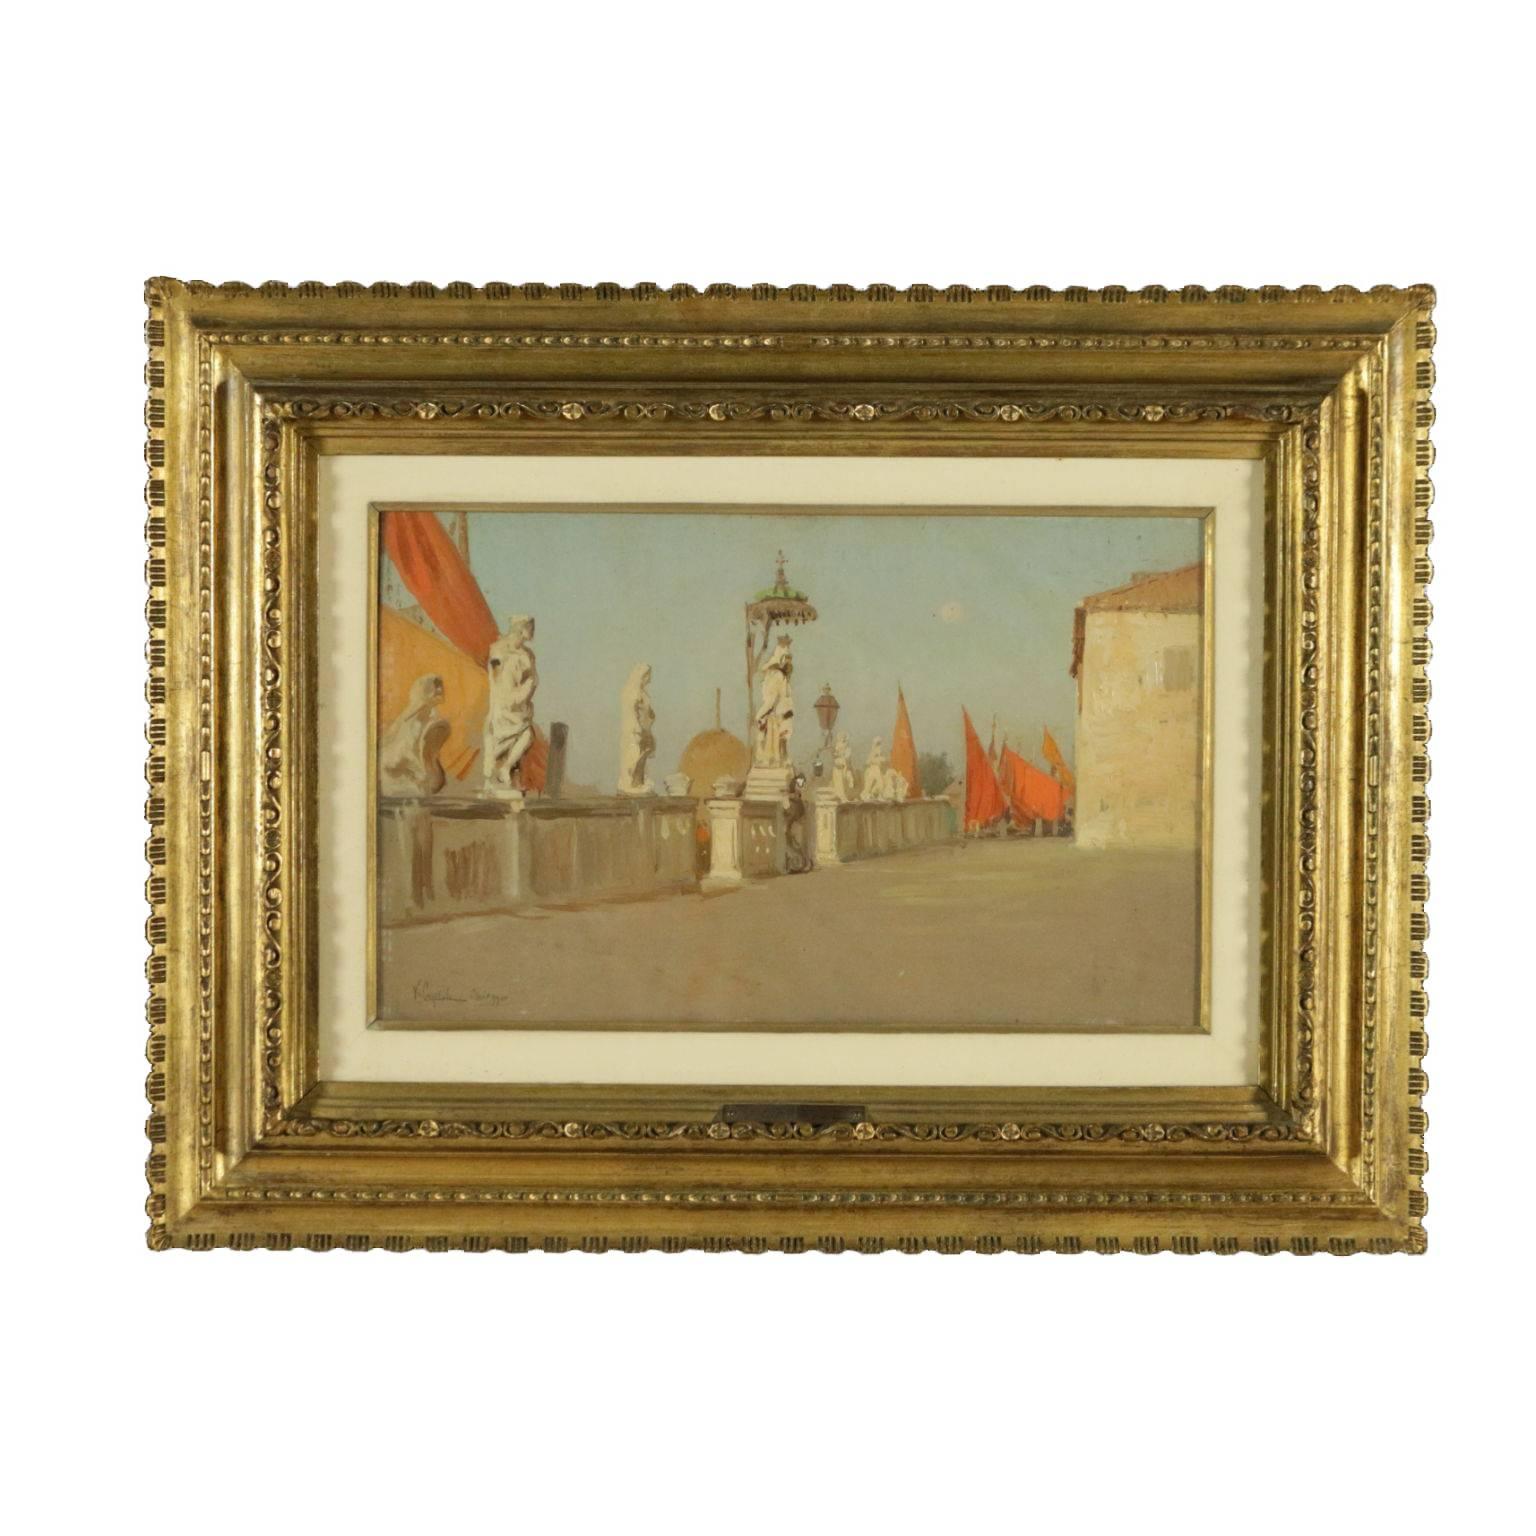 Oil on board by Vincenzo Caprile. Signature and title in the lower left corner. On the back, expertise written by the nephew "declare that this painting was painted by my uncle V. Caprile. Sold by the nephew Giuseppe Caprile. 9/29/1936 XVI of the